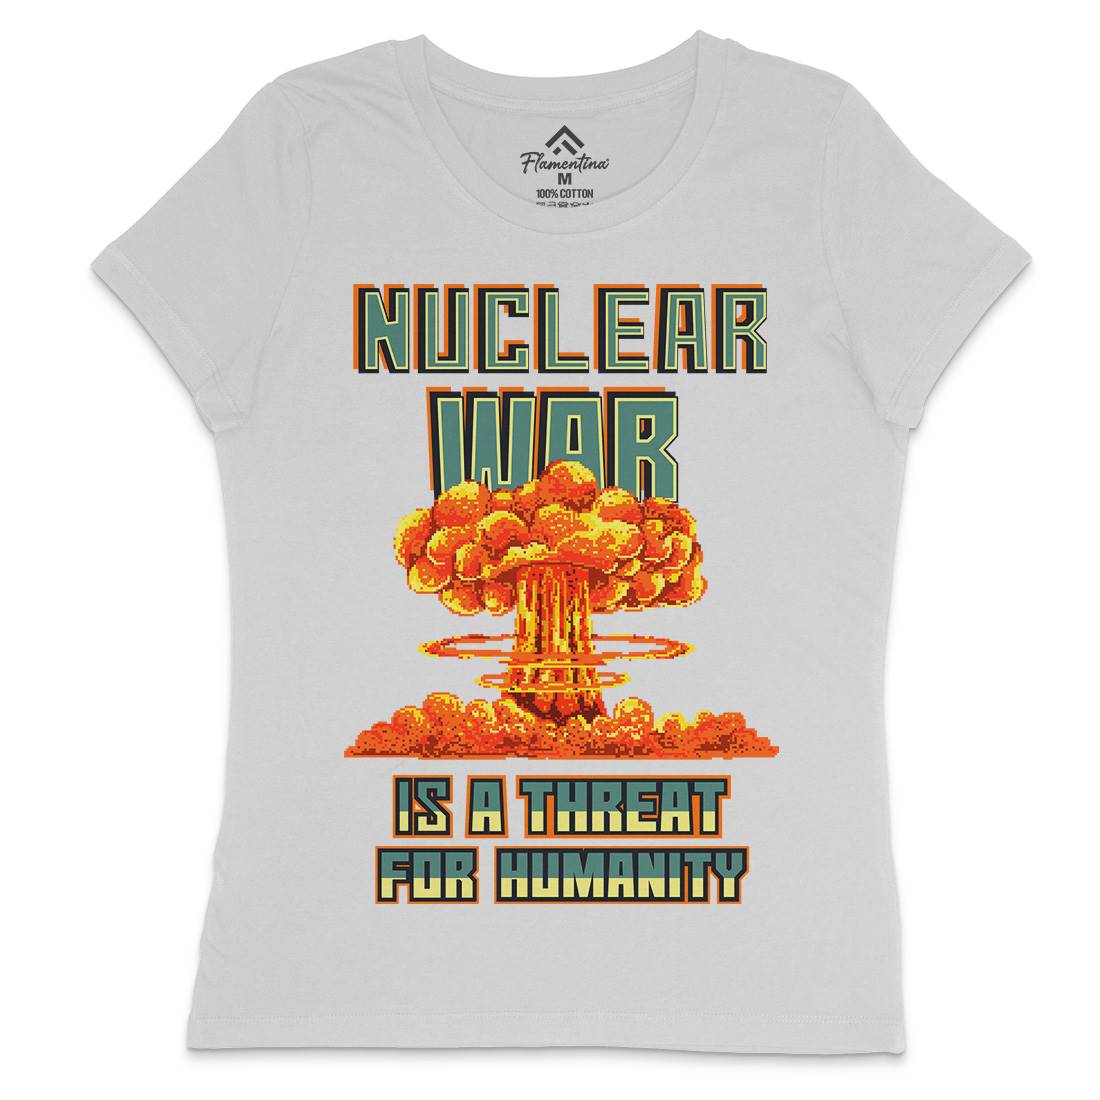 Nuclear War Is A Threat For Humanity Womens Crew Neck T-Shirt Army B941